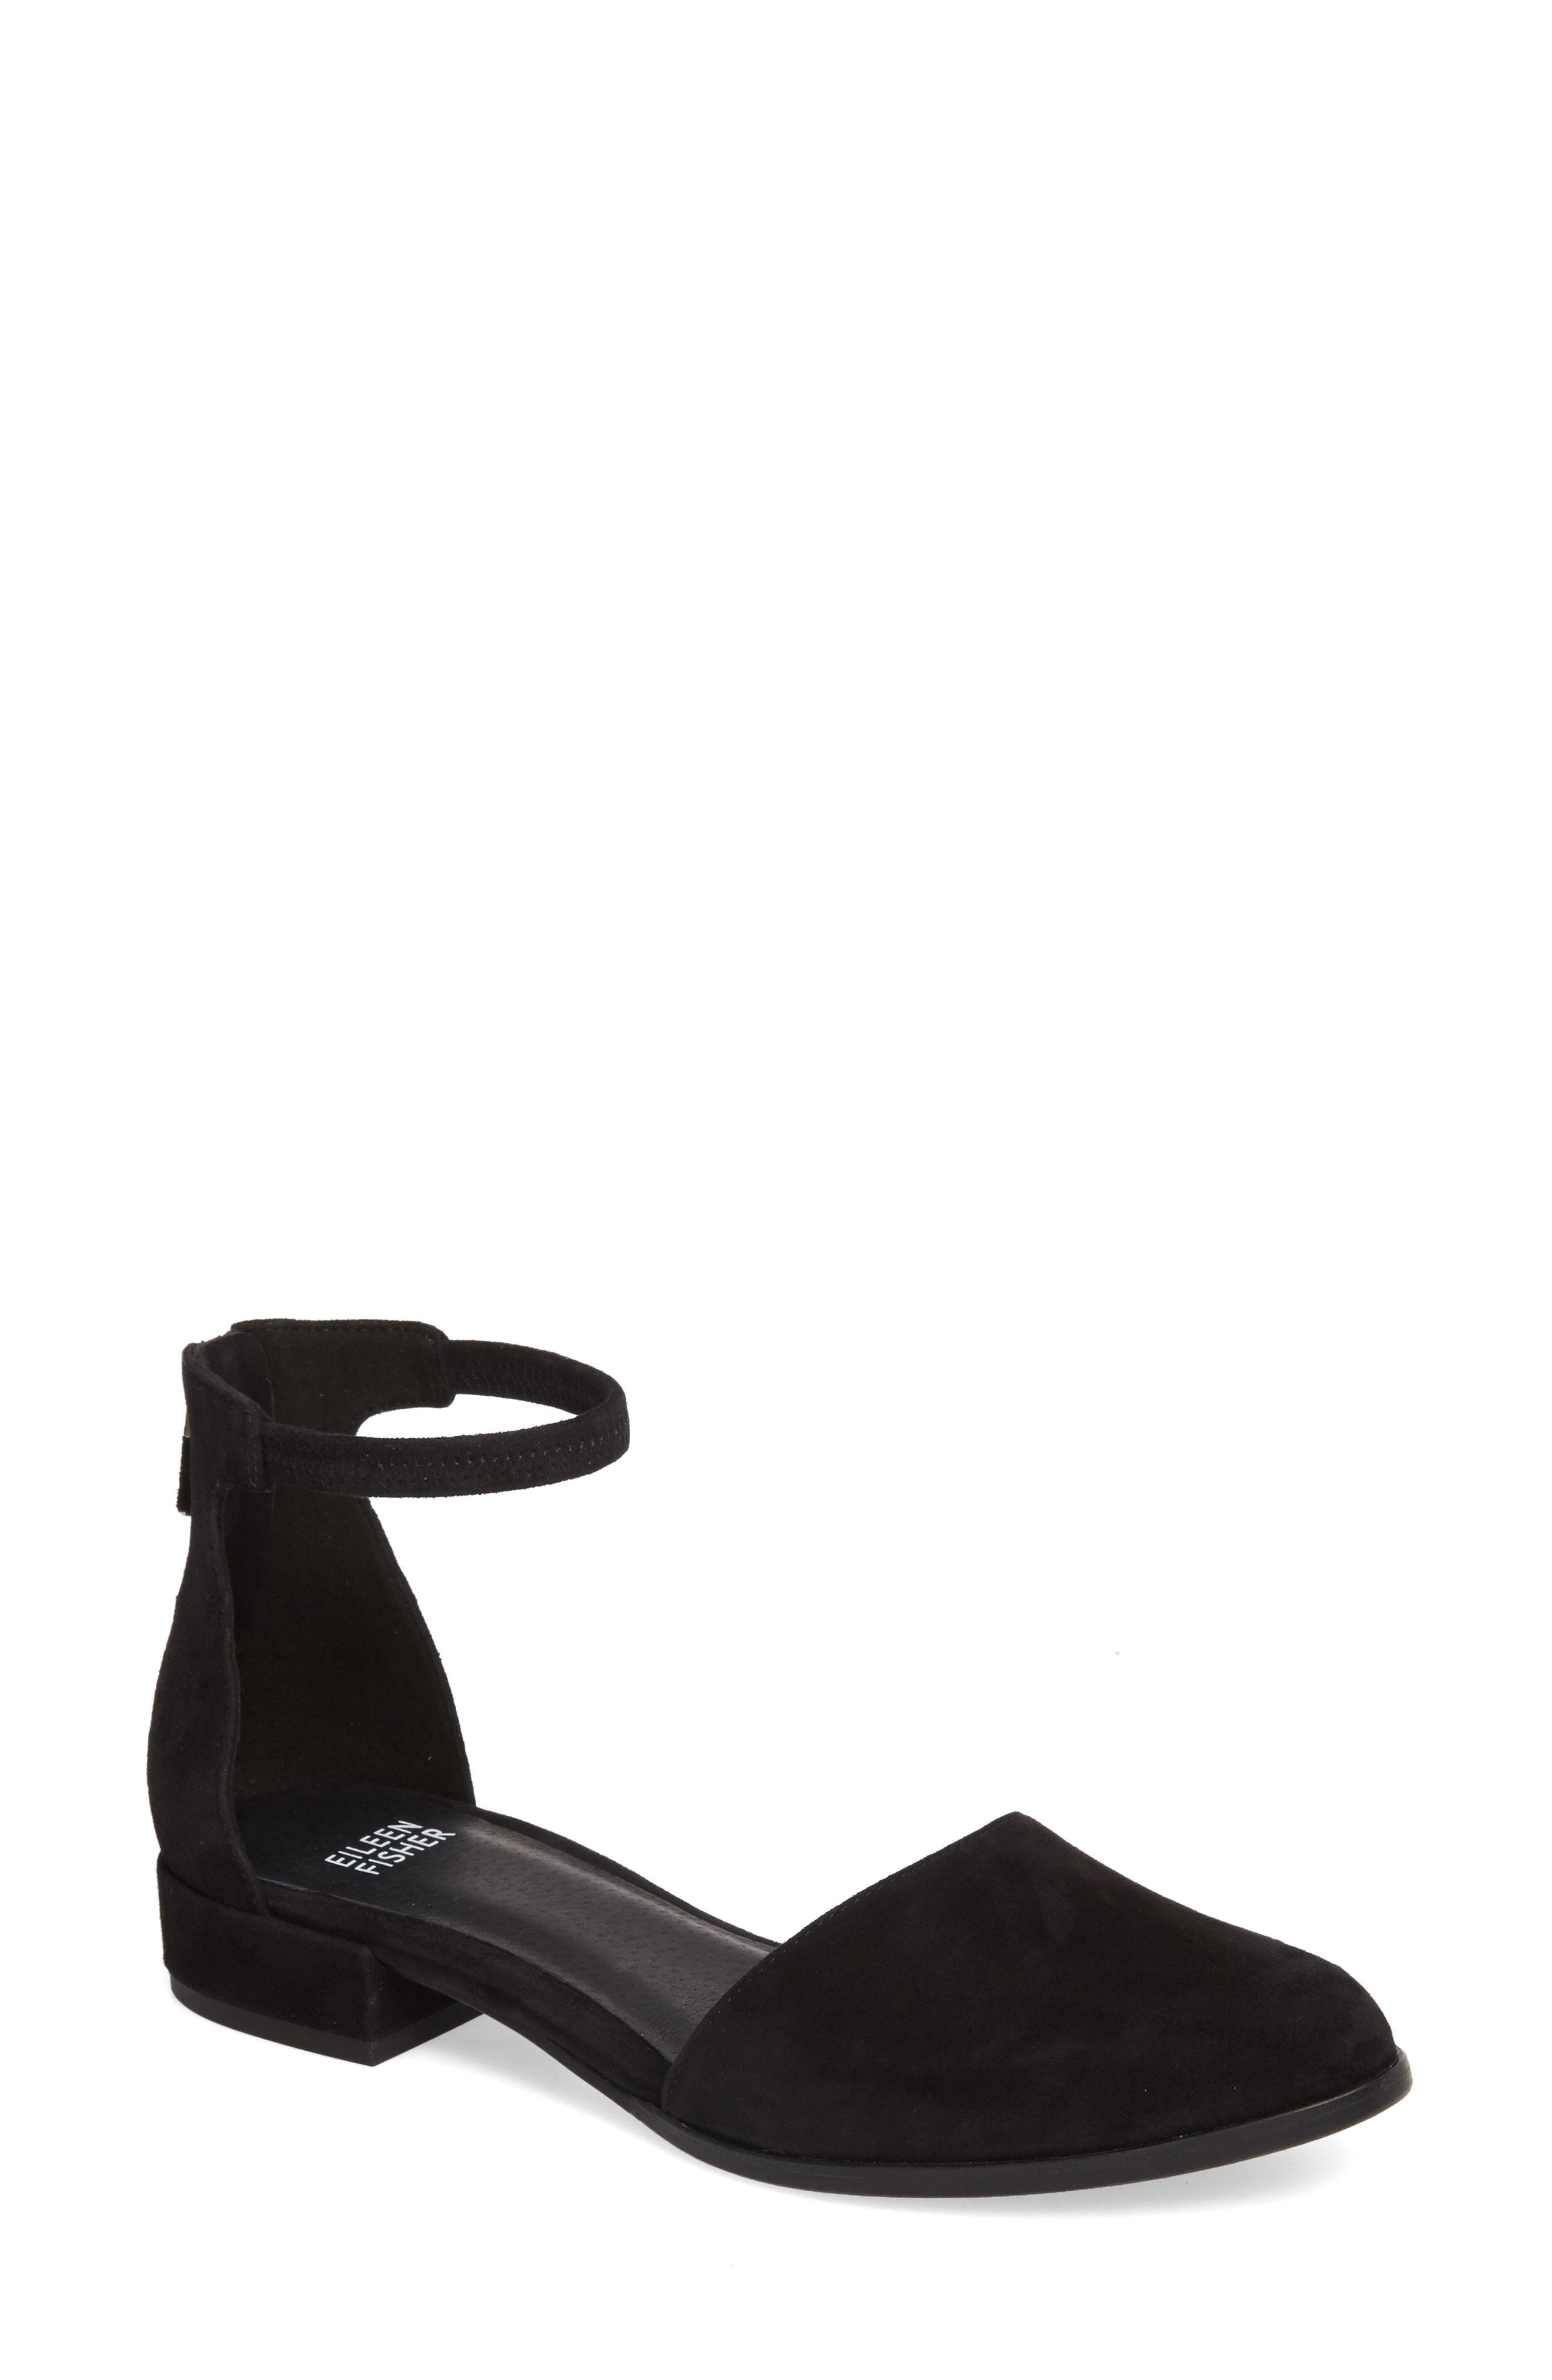 Eileen Fisher Hutton Ankle Strap Shoe 